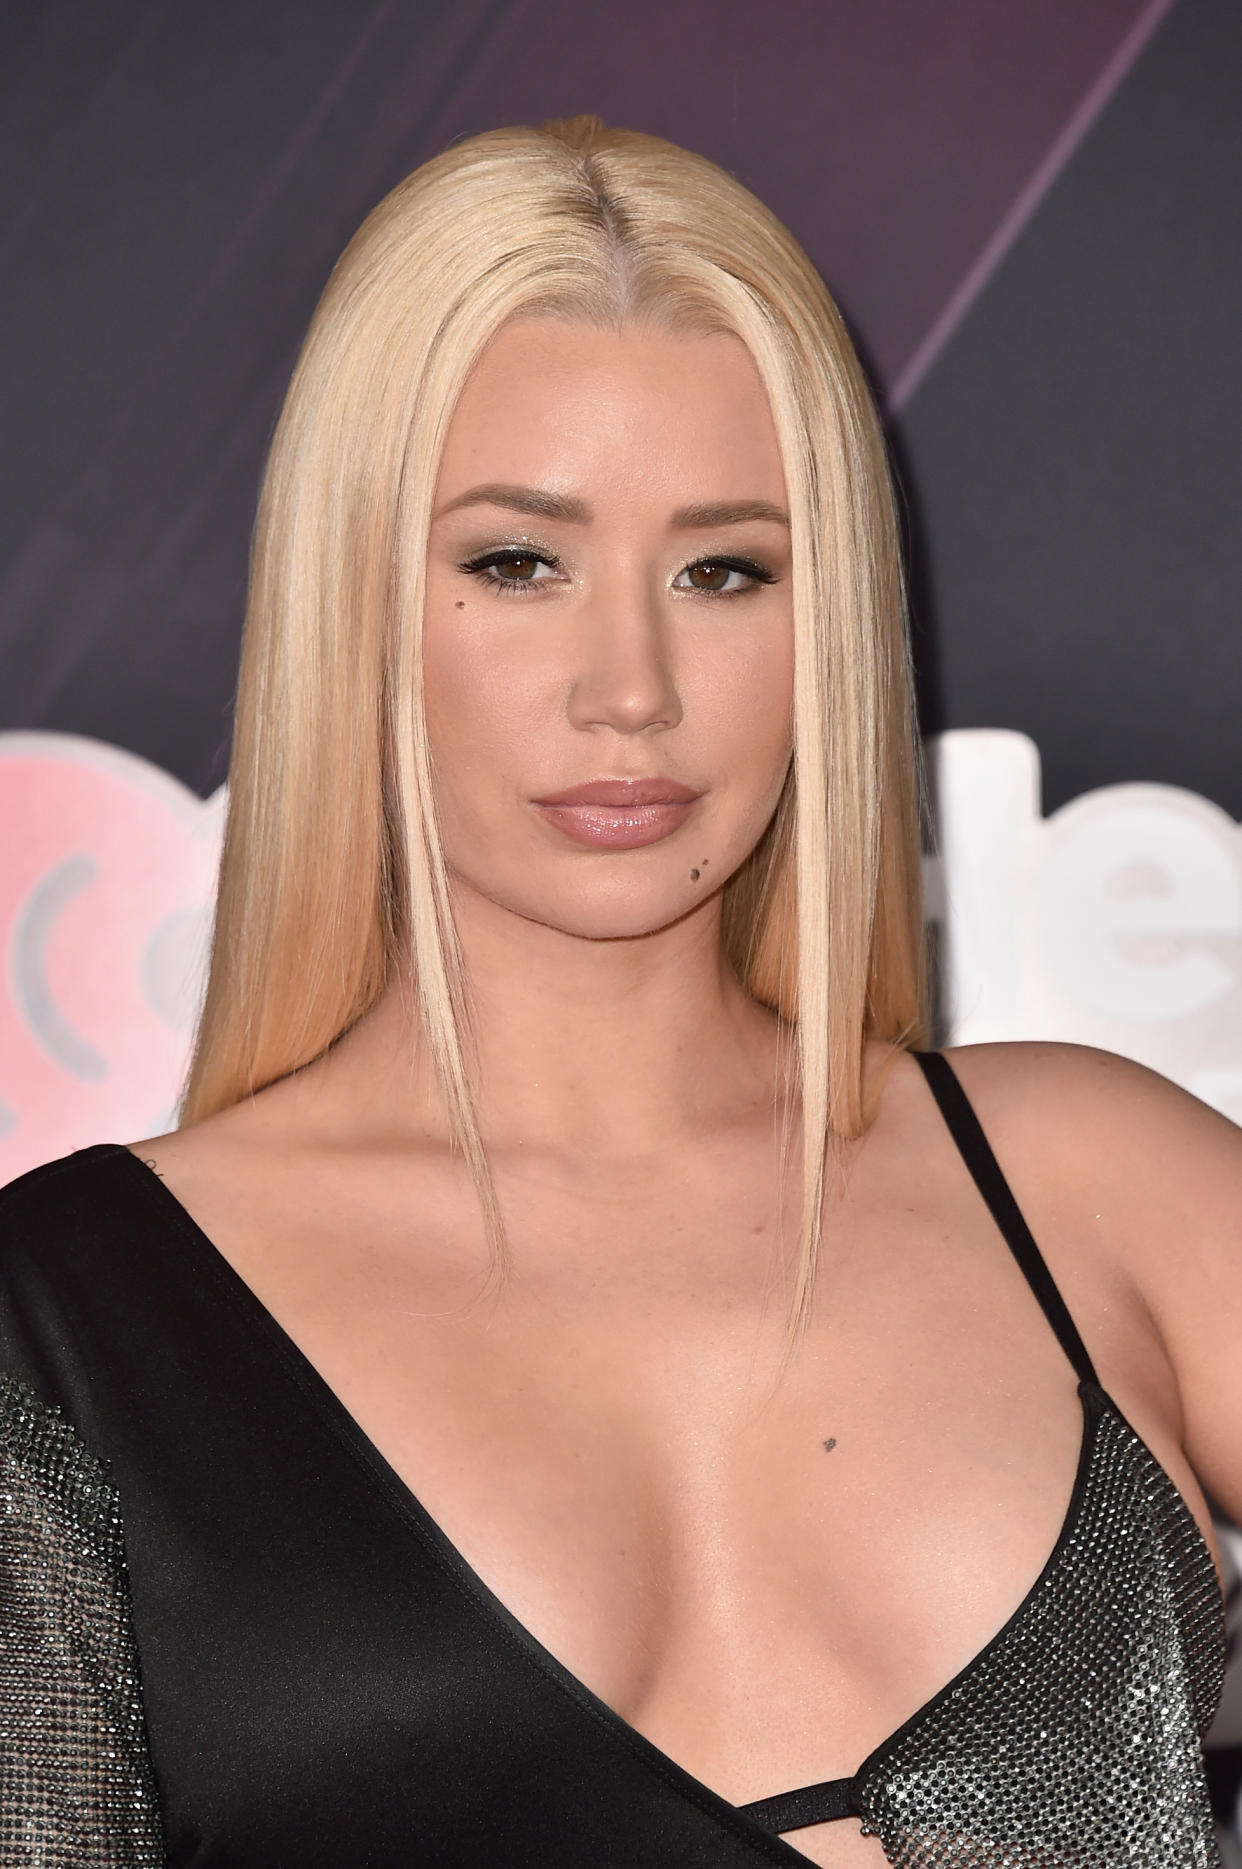 Iggy Azalea is standing up for herself. (Photo: Alberto E. Rodriguez/Getty Images)